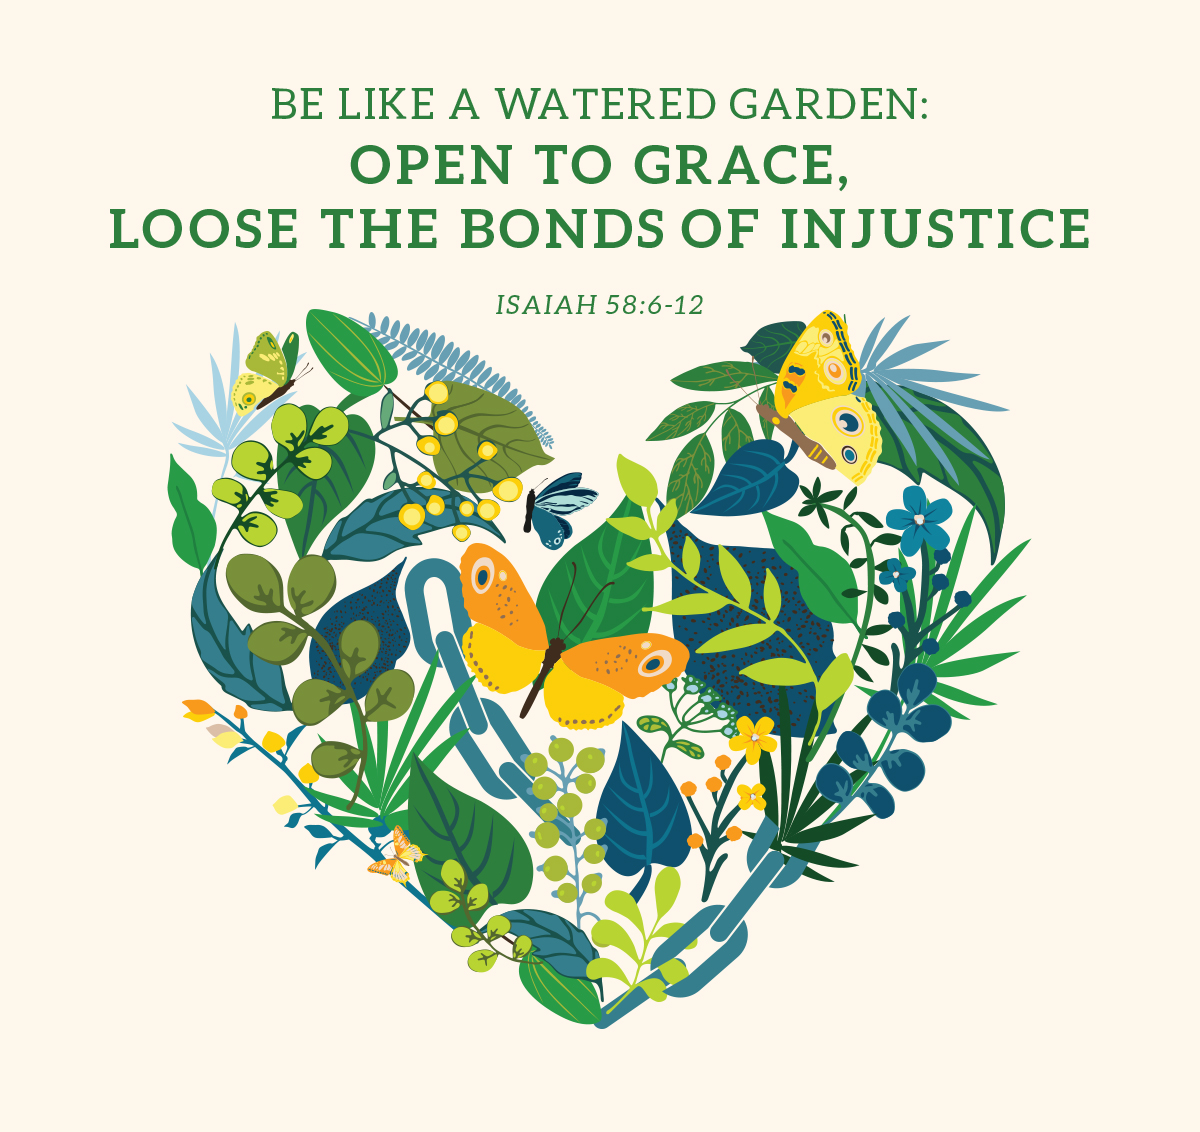 A heart-shaped image combining plants and butterflies in shades of green, orange and yellow, accompanied by the words "Be like a watered garden: open to Grace, loose the bonds of injustice."